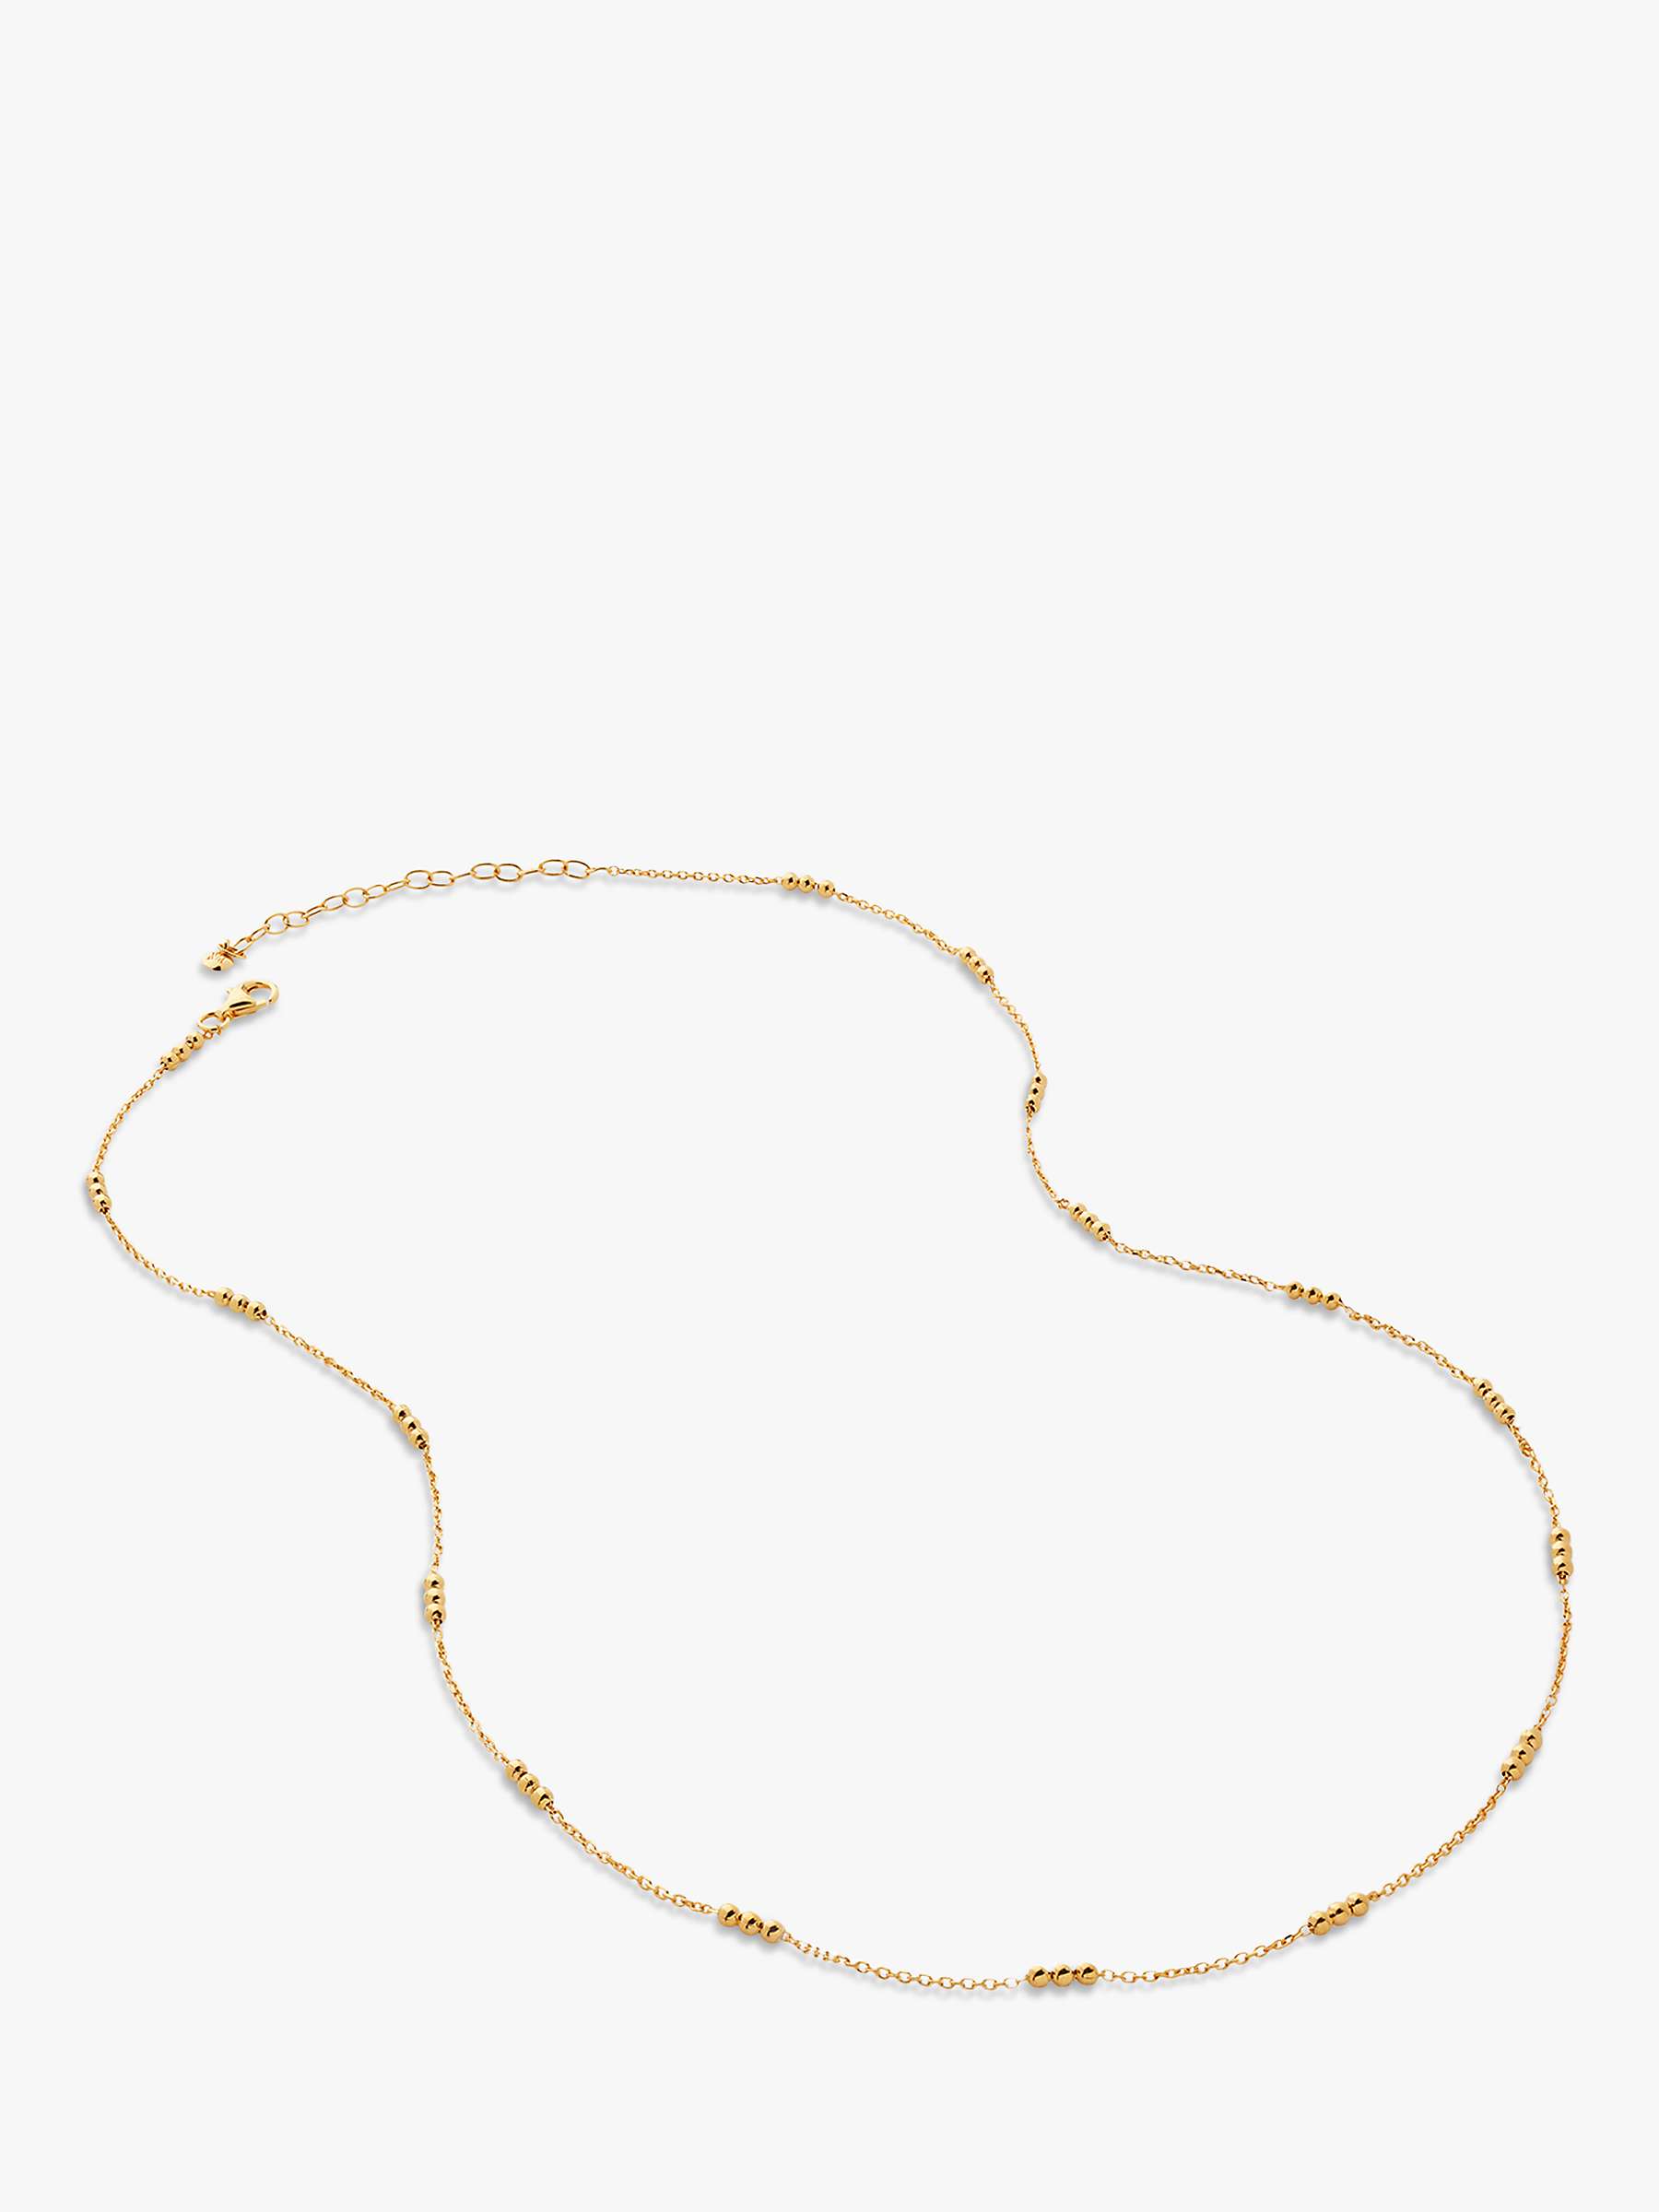 Buy Monica Vinader Triple Beaded Chain Necklace Online at johnlewis.com